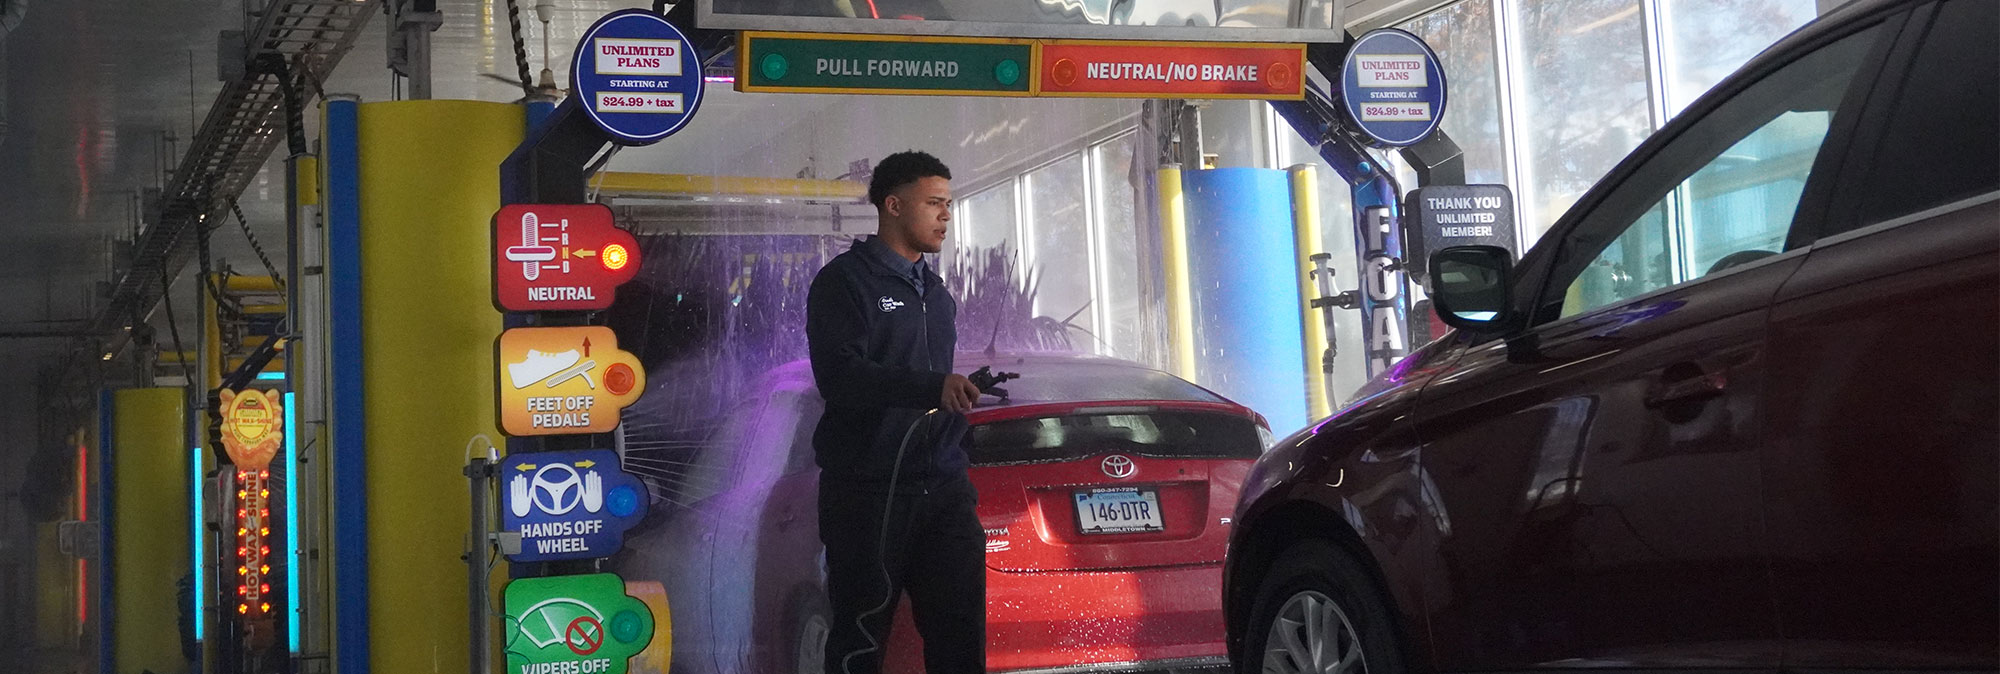 Using A Car Wash Nearby to Keep Clean of Pollen